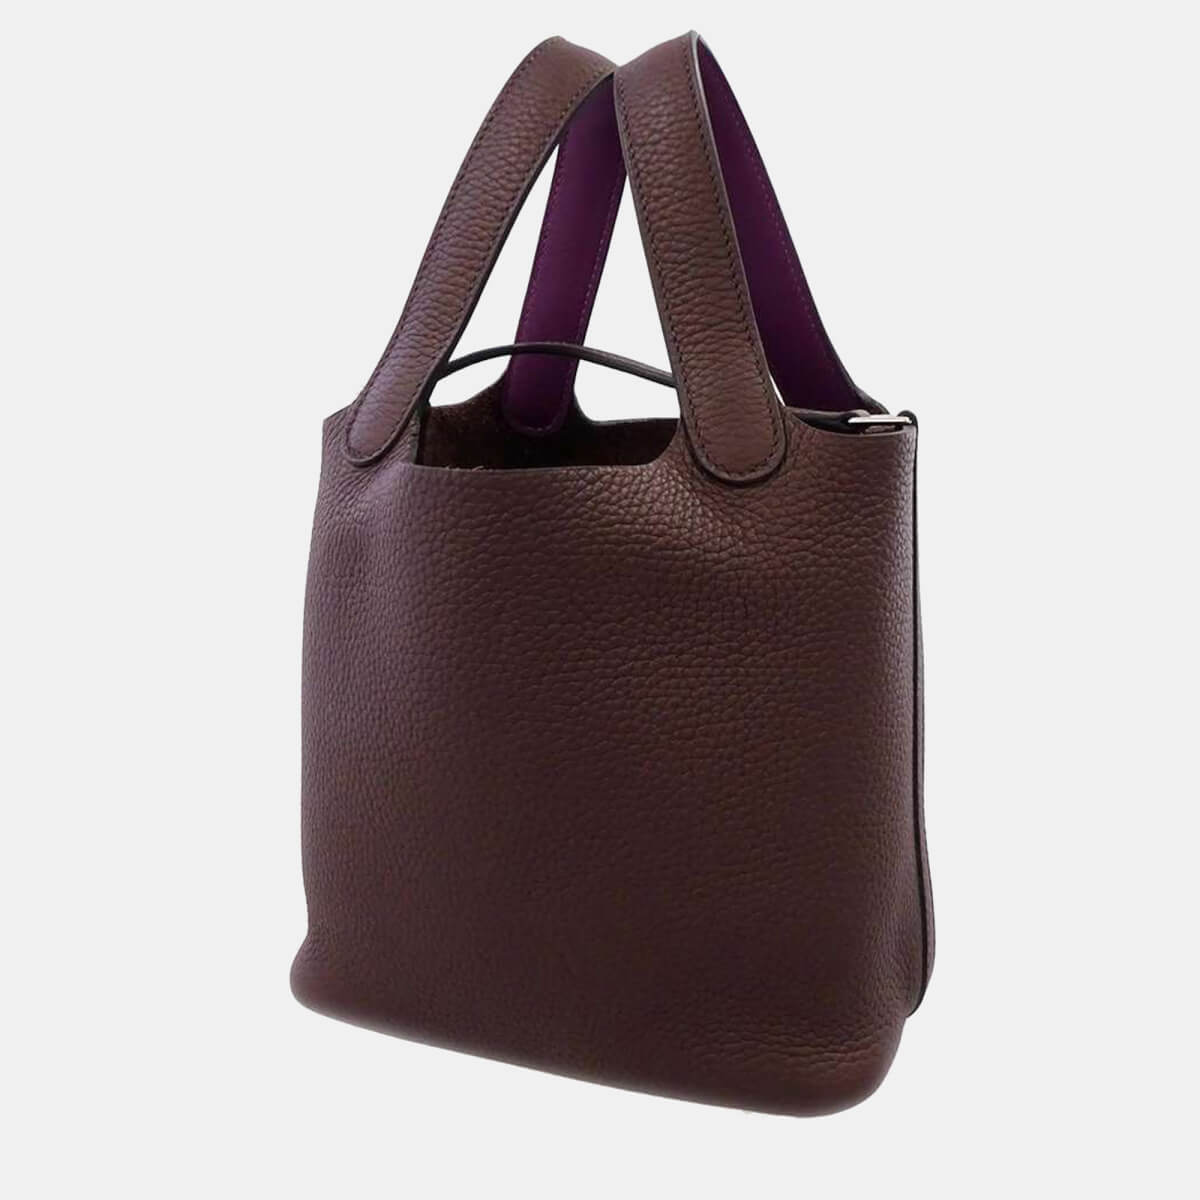 Hermes Purple Taurillon Clemence Swift Leather Eclat Picotin Lock PM Tote Bag